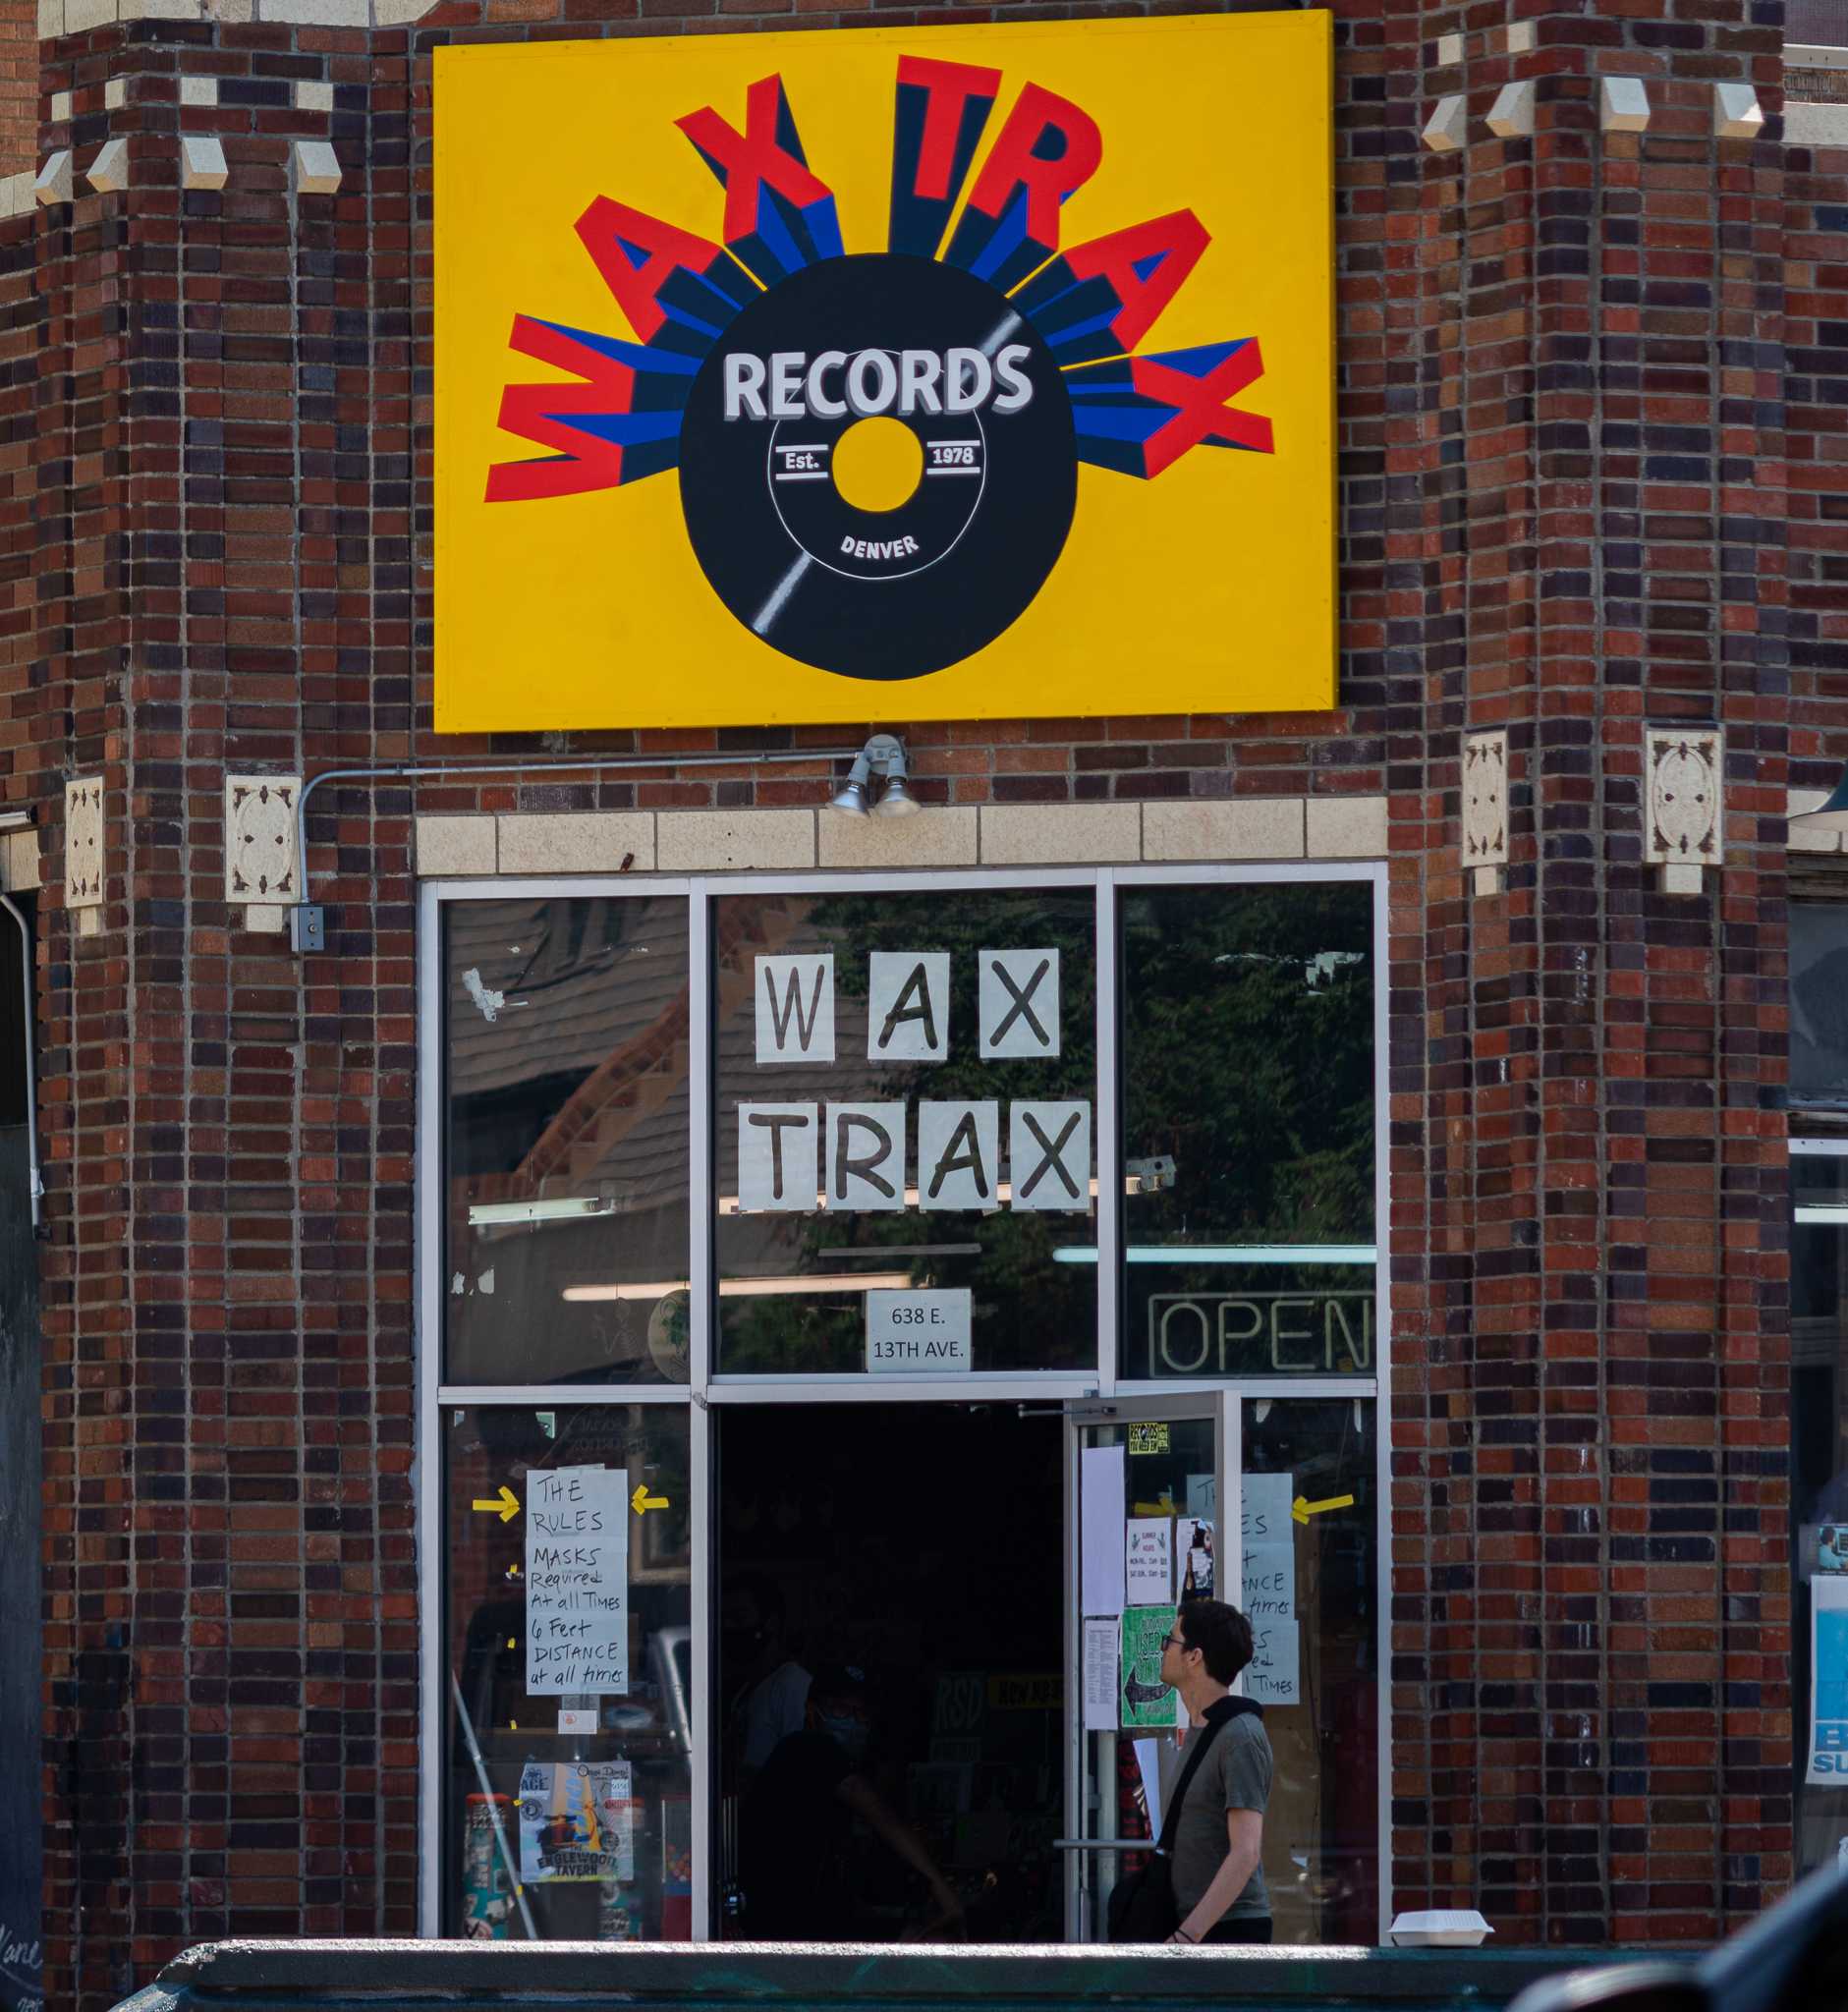 Entrance of Wax Trax Records